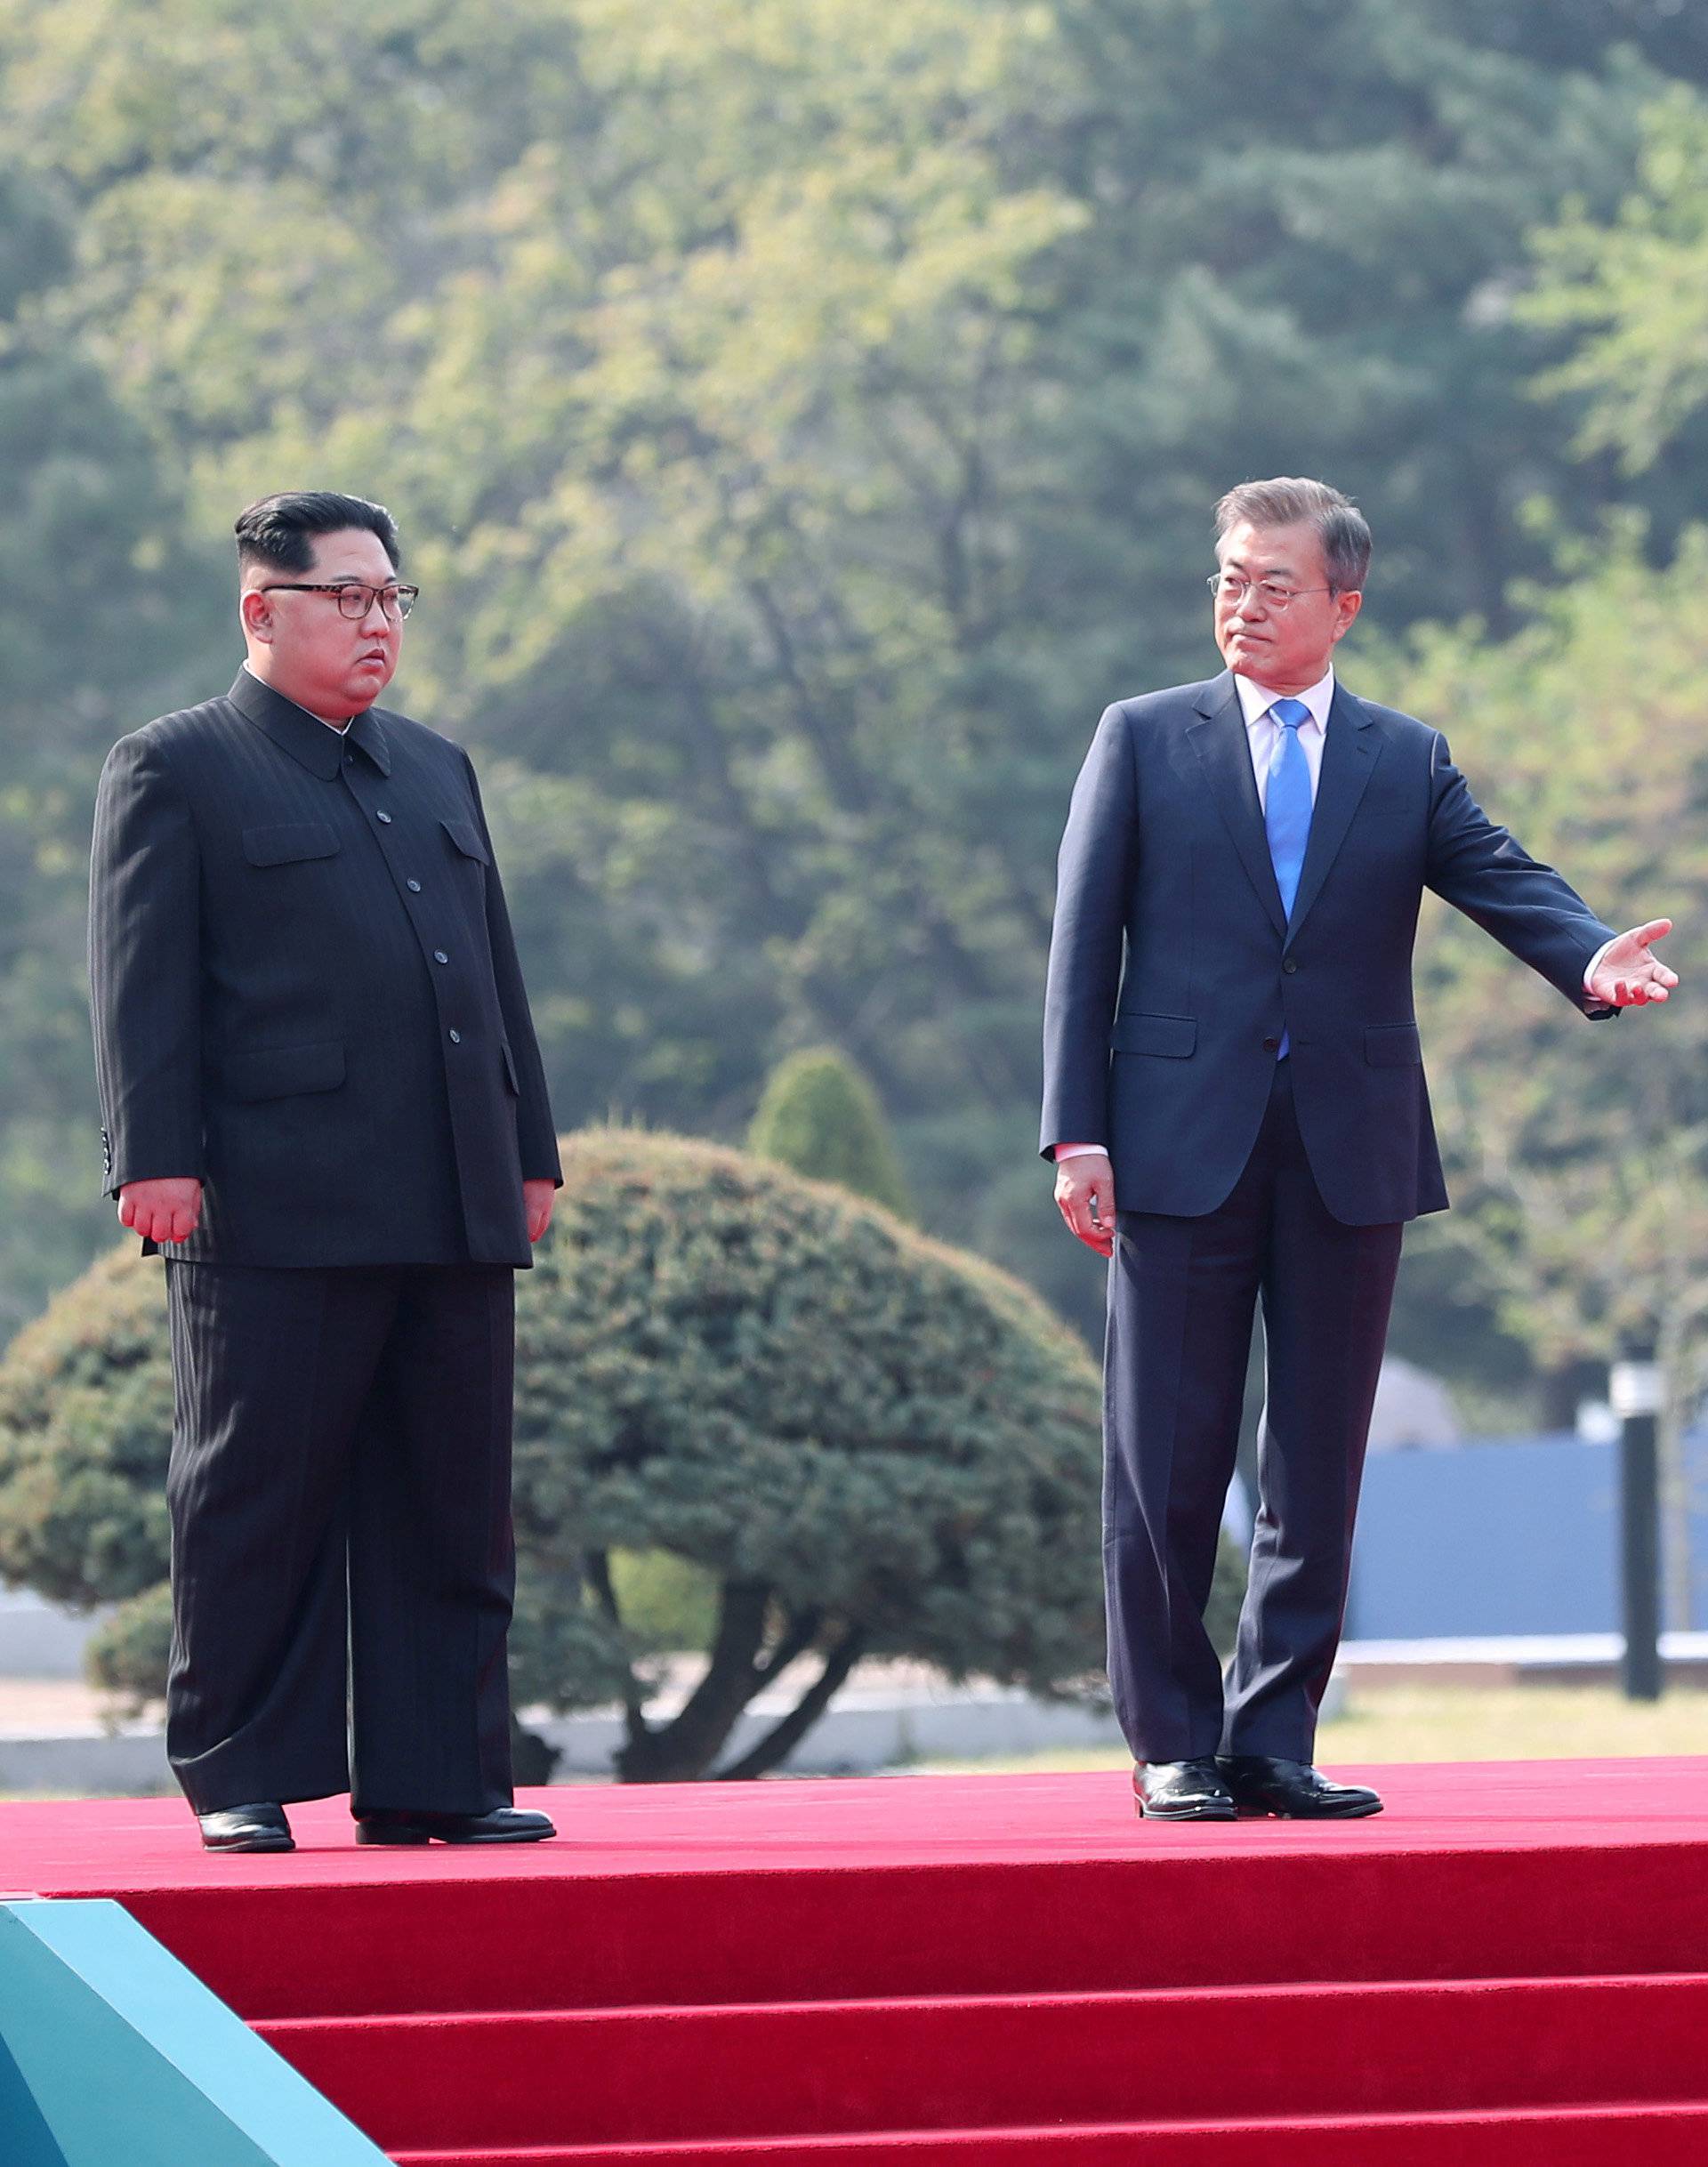 South Korean President Moon Jae-in gestures to North Korean leader Kim Jong Un during their meeting at the truce village of Panmunjom